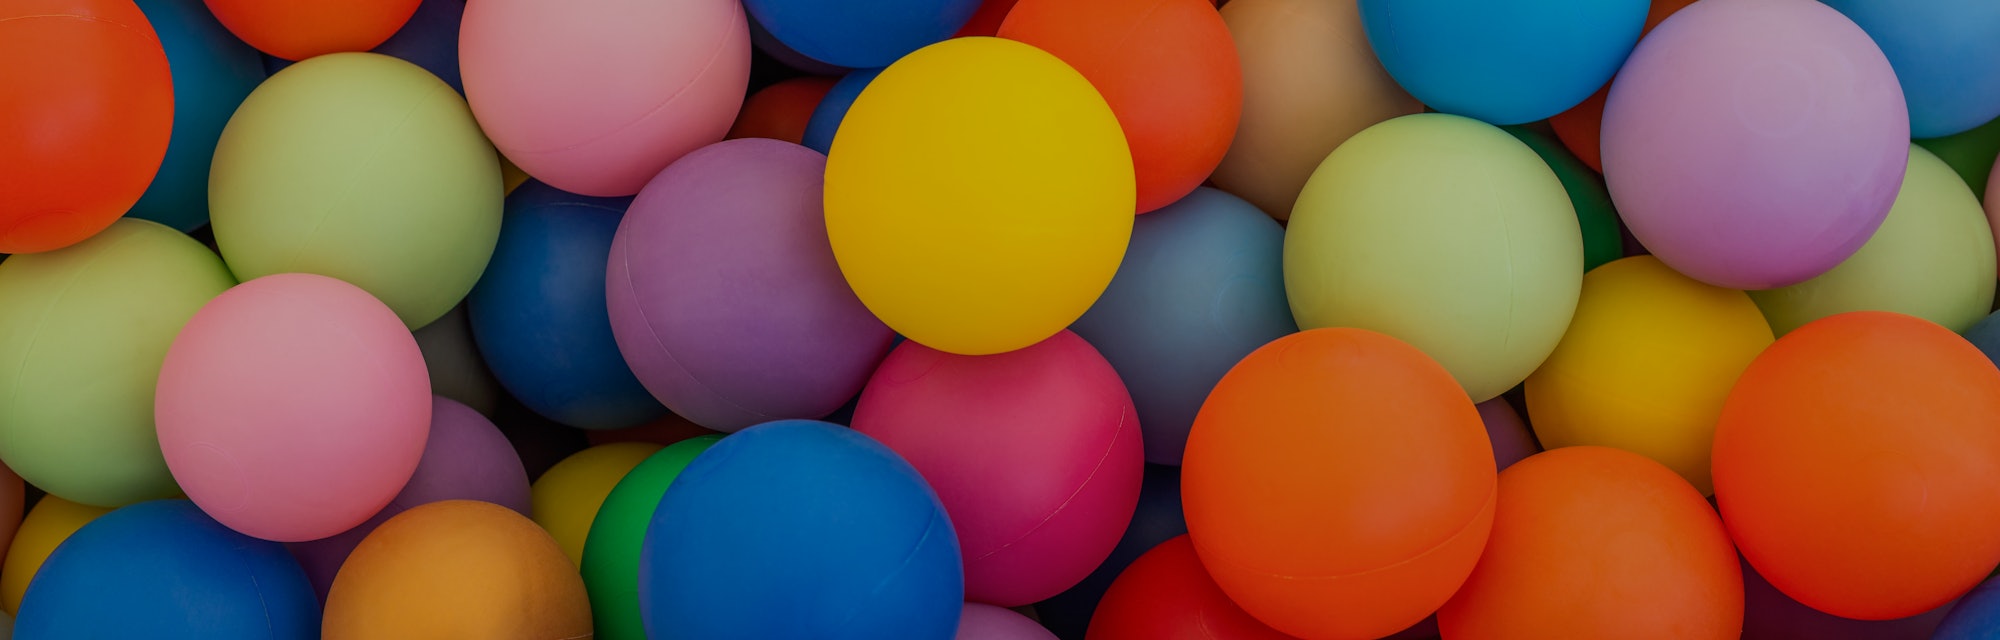 Full frame of multicolored plastic balls in the ball pit (ball crawl). Lots of colorful balls for ch...